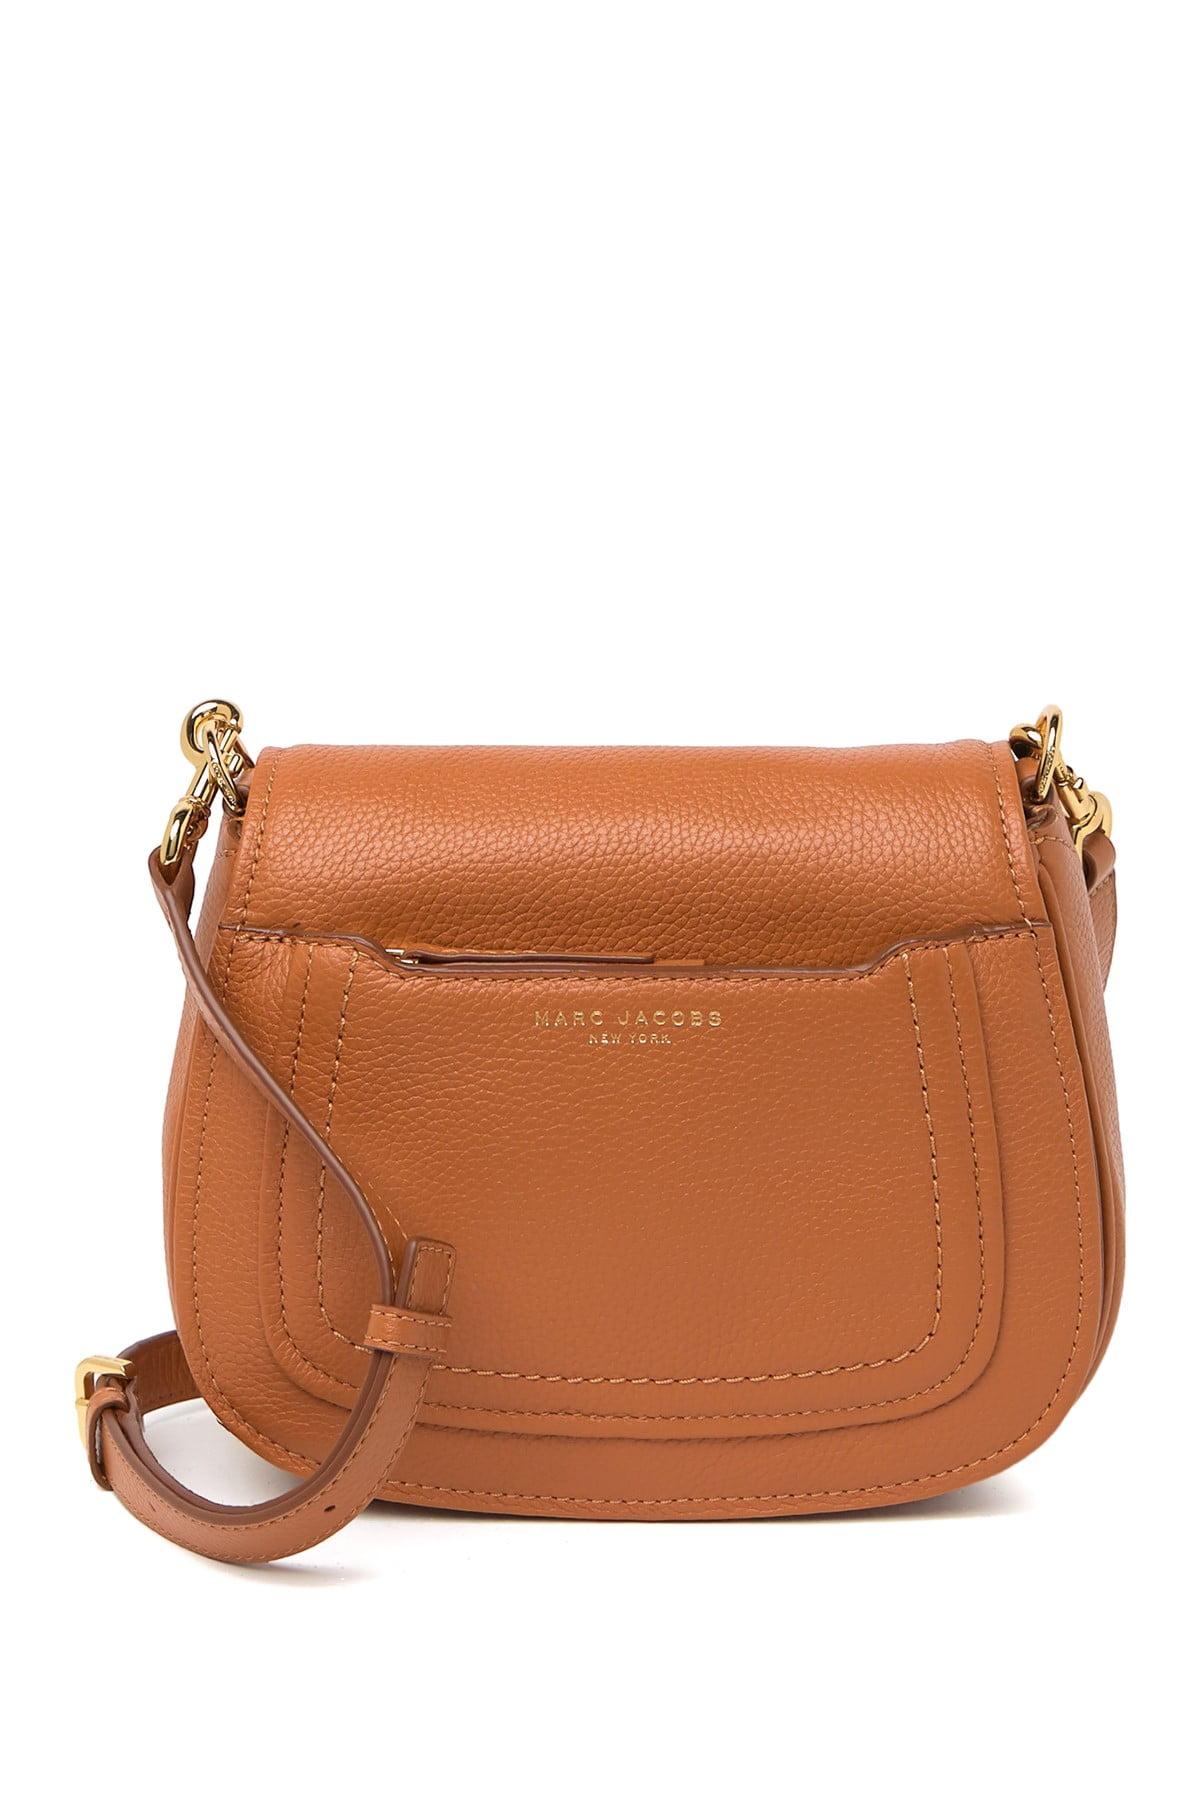 Marc Jacobs Empire City Mini Messenger Leather Crossbody Bag in Brown | Lyst